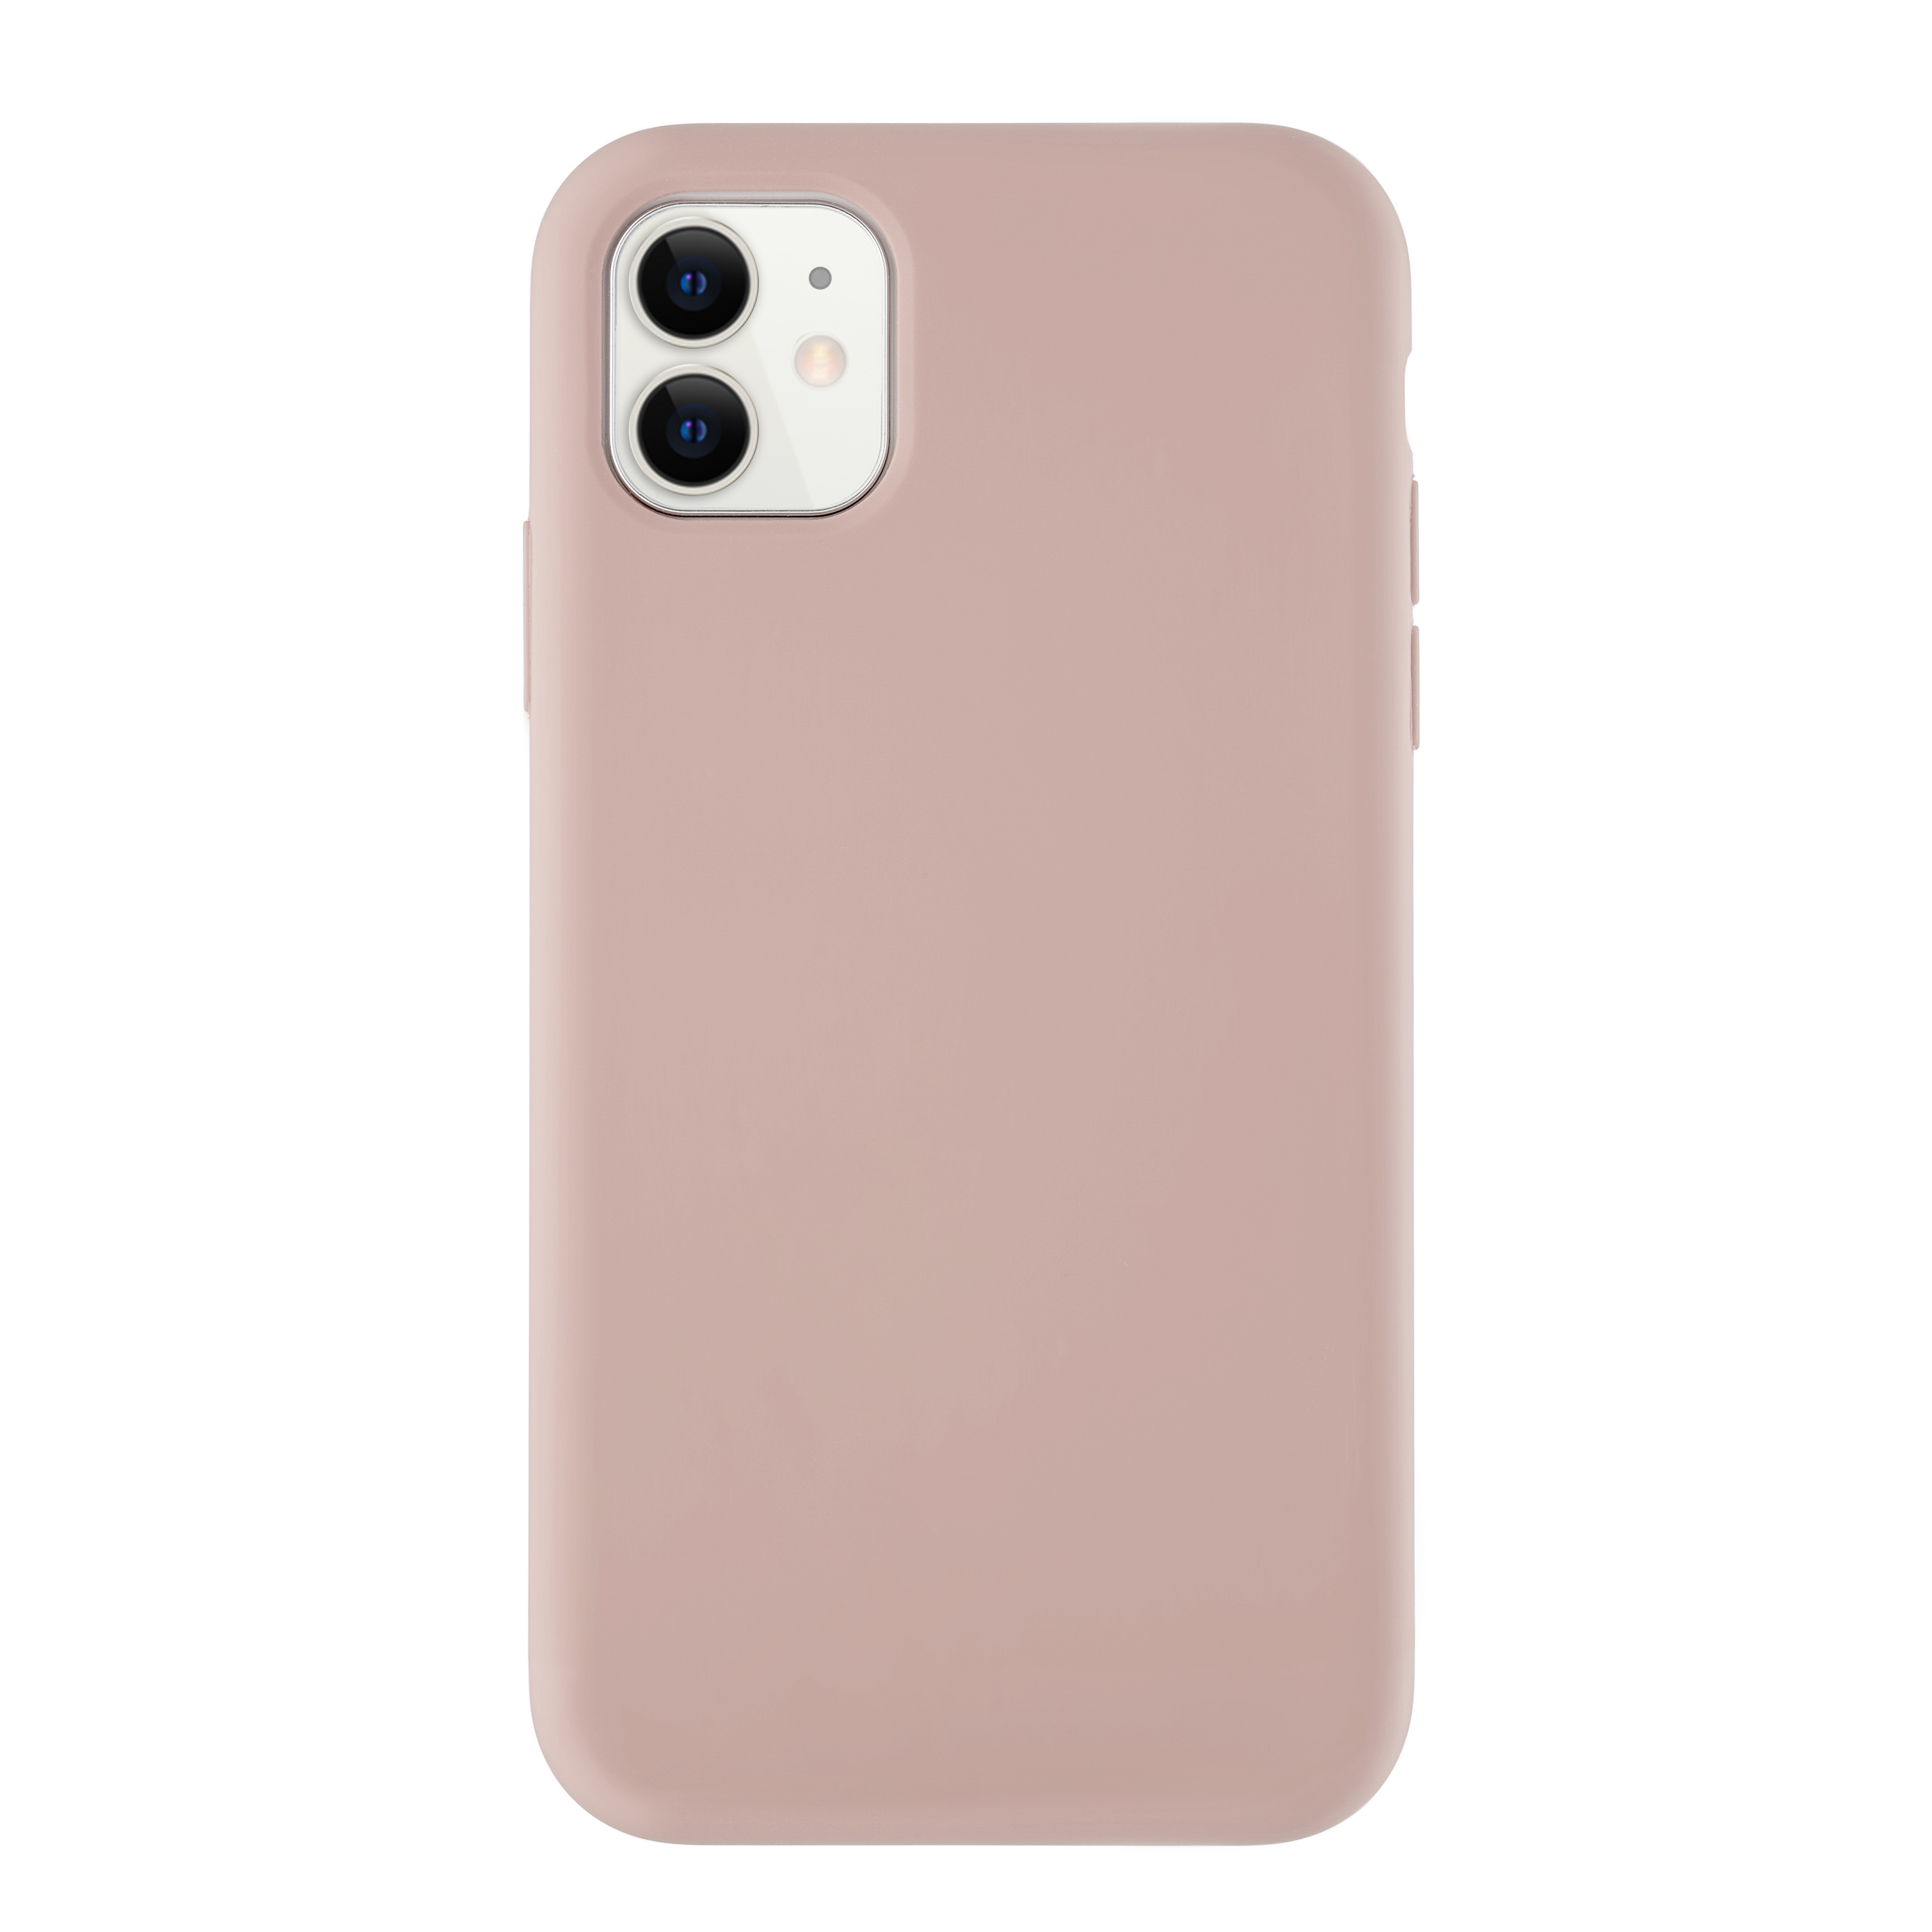 Touch Case for iPhone 11 (силикон soft touch), розовый